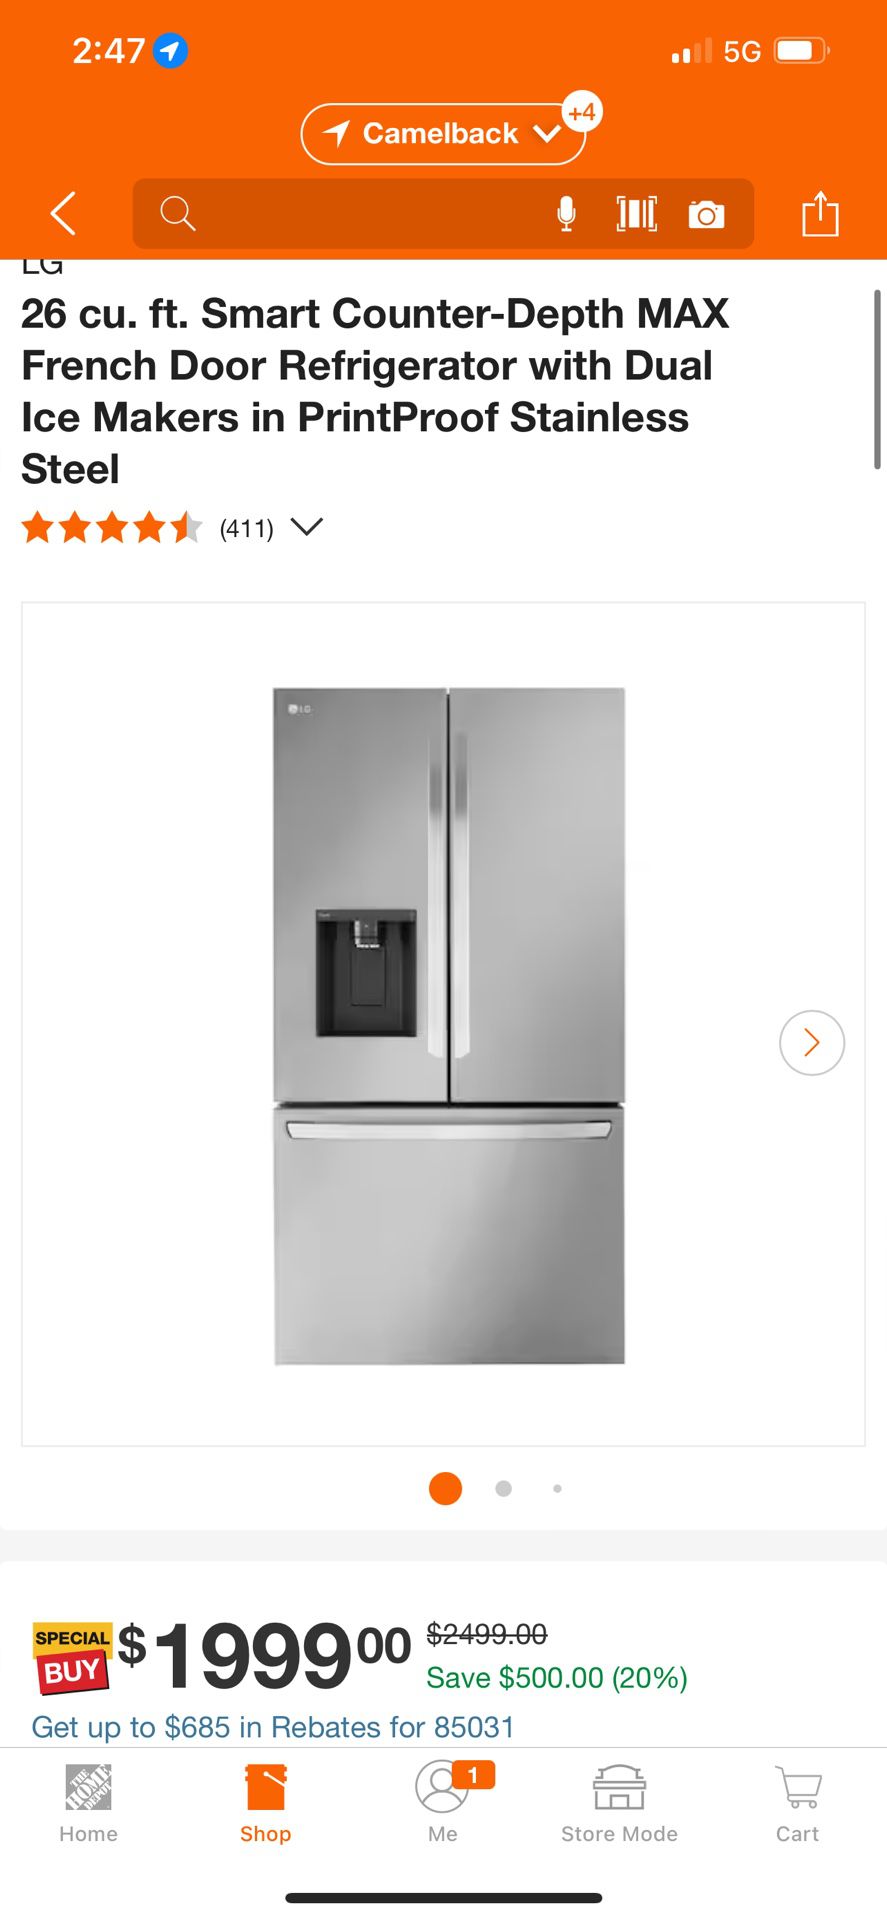 LG 26 cu. ft. Smart Counter-Depth MAX French Door Refrigerator with Dual Ice Makers in PrintProof Stainless Steel